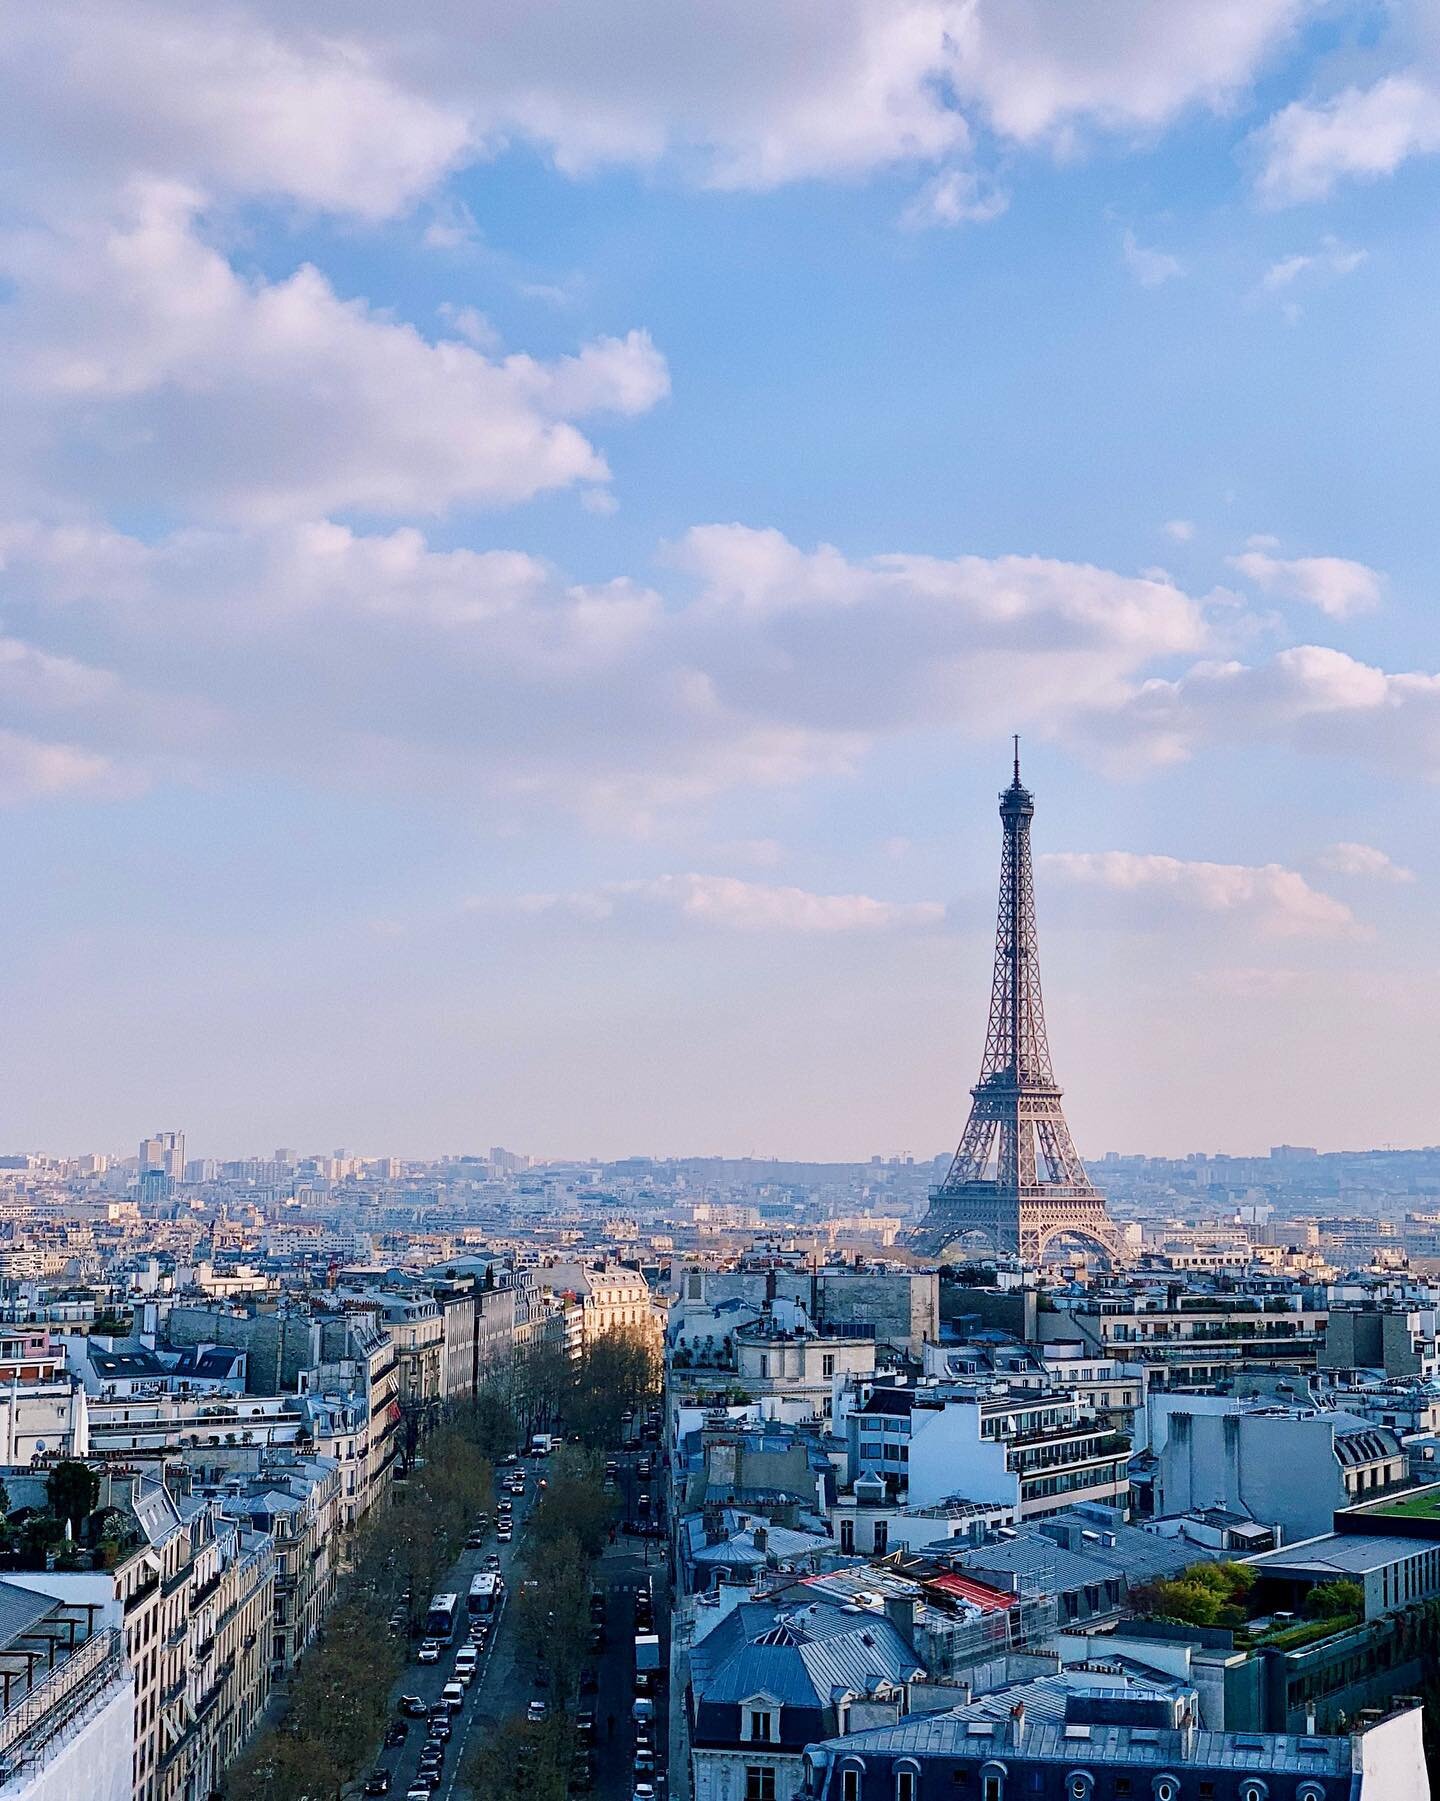 As Audrey Hepburn famously said in Sabrina, &ldquo;Paris is always a good idea.&rdquo; For many people, these words ring true. It&rsquo;s easy to be inspired in the City of Light.

Hepburn spent much of her adult life in Paris, staying at the family-